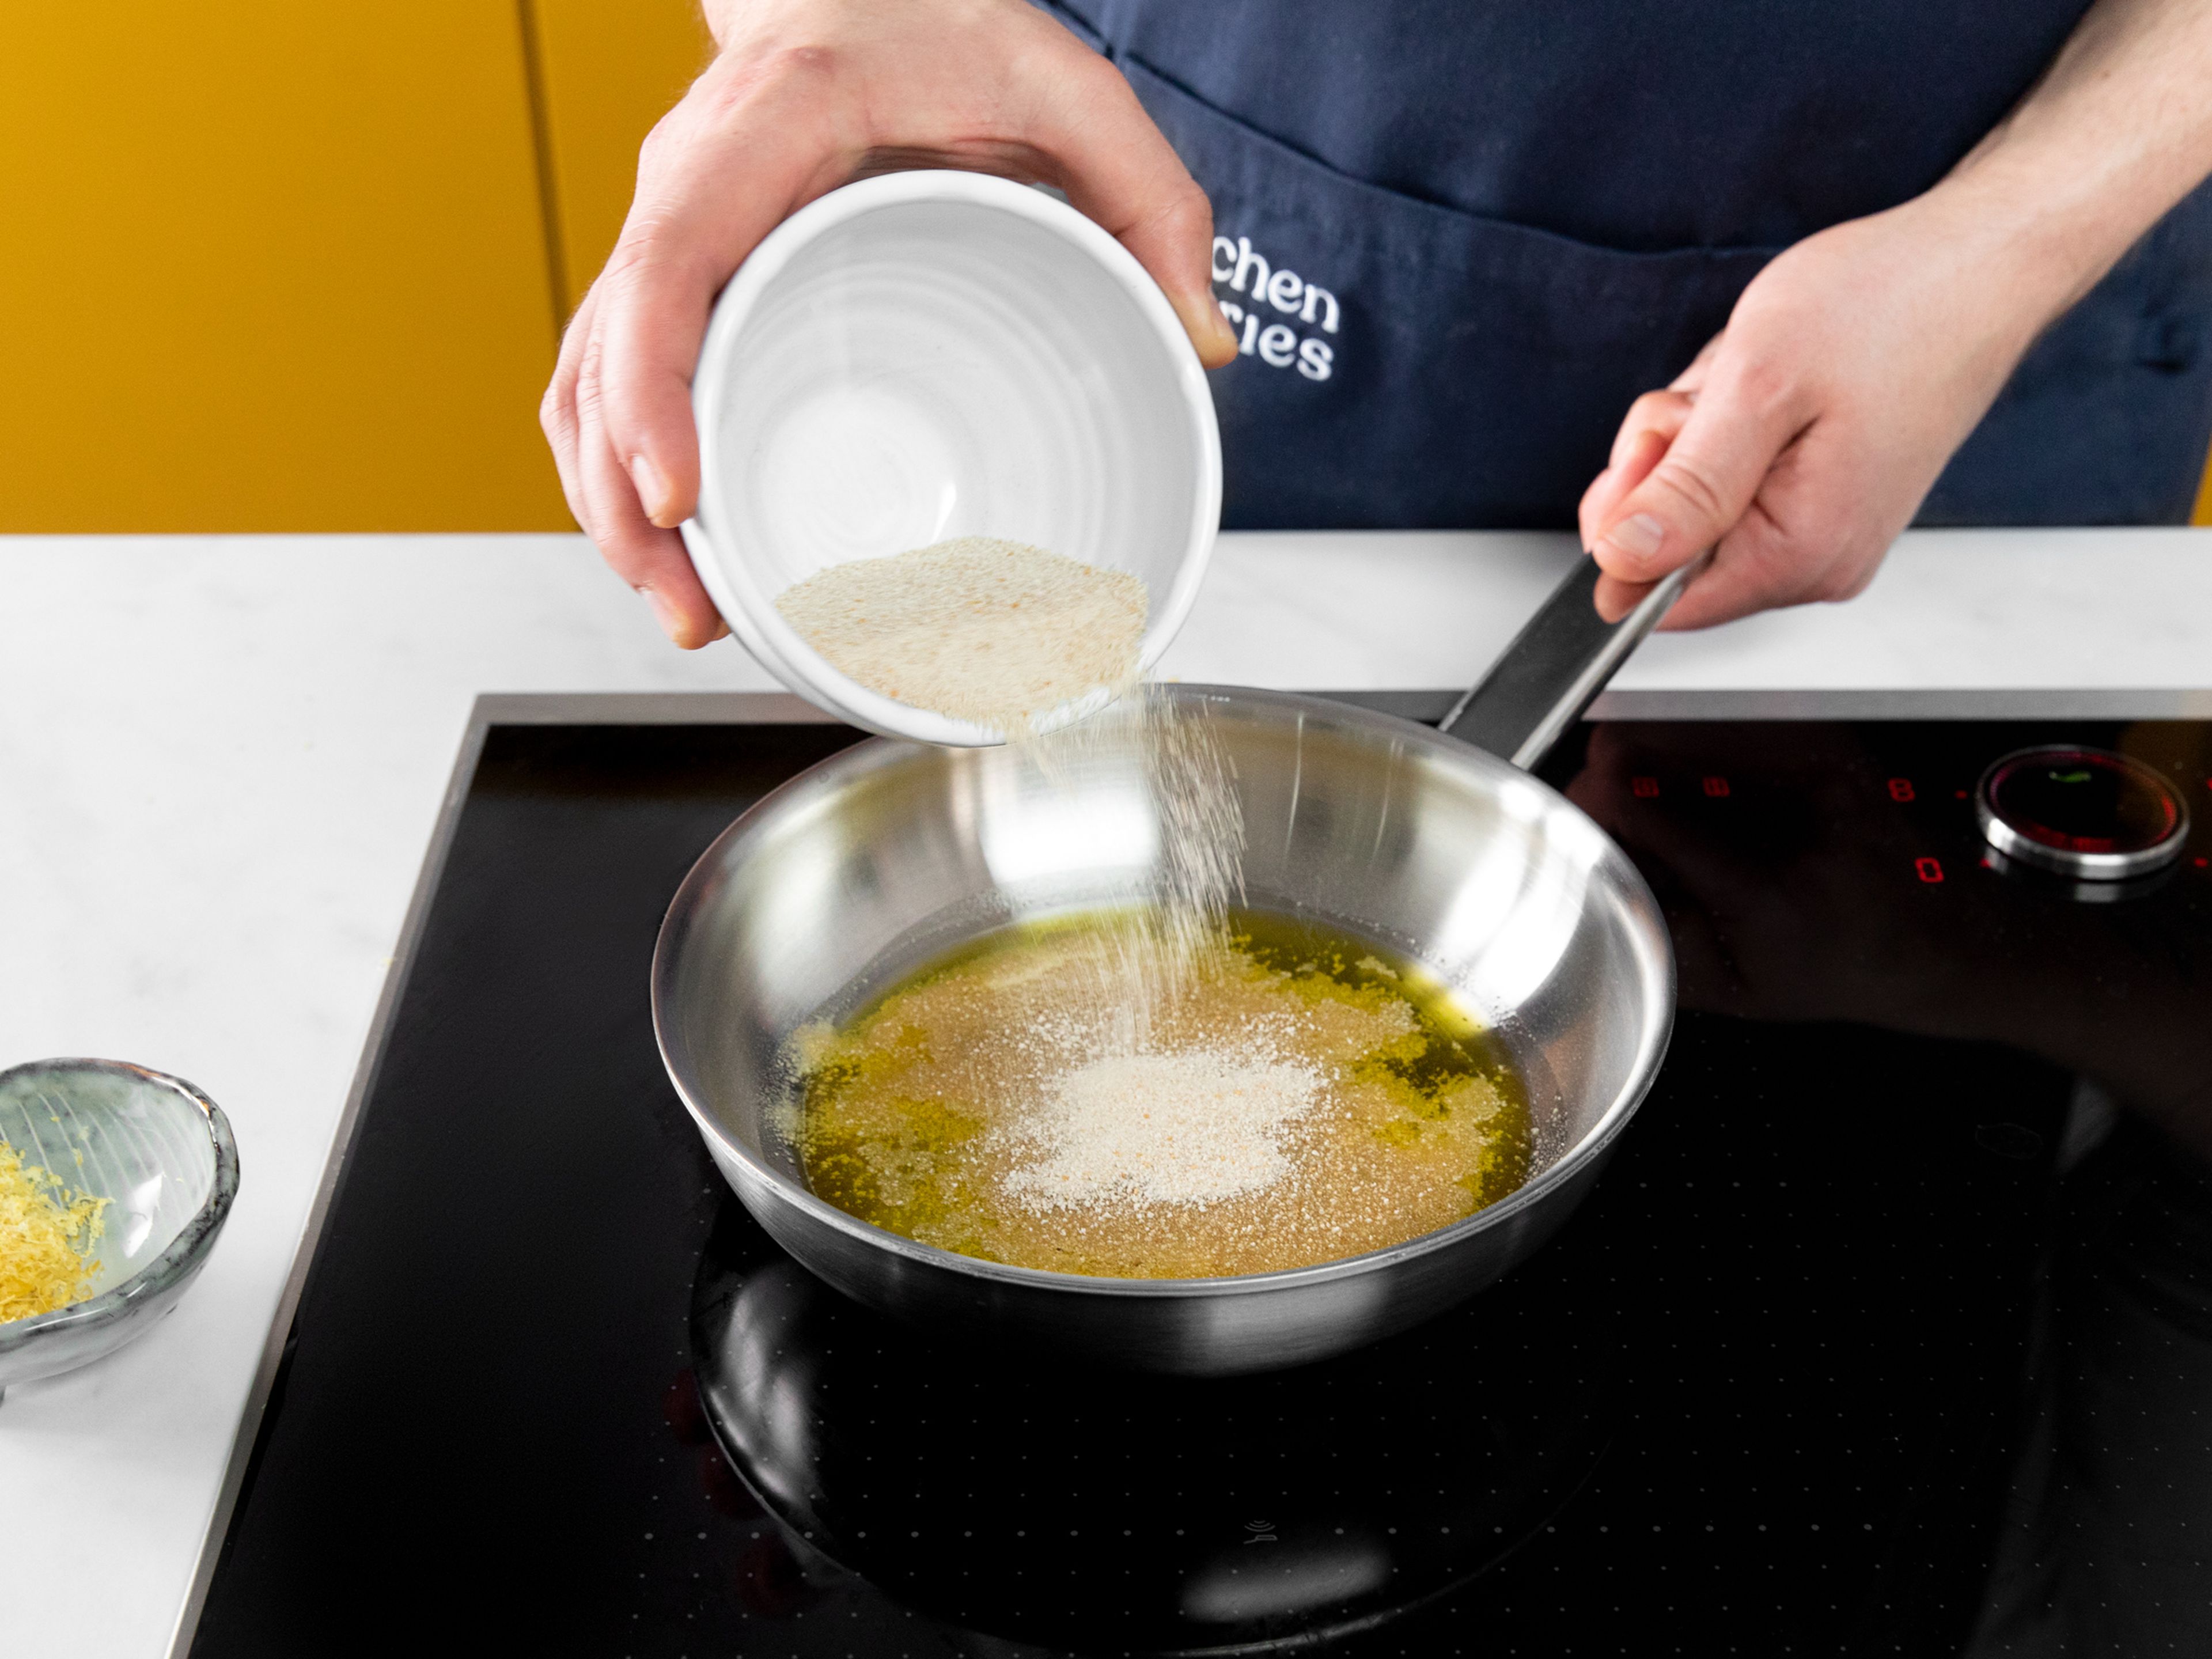 Heat remaining olive oil in a separate frying pan over medium heat. Add breadcrumbs and toast until golden brown. Remove from heat and add lemon zest.